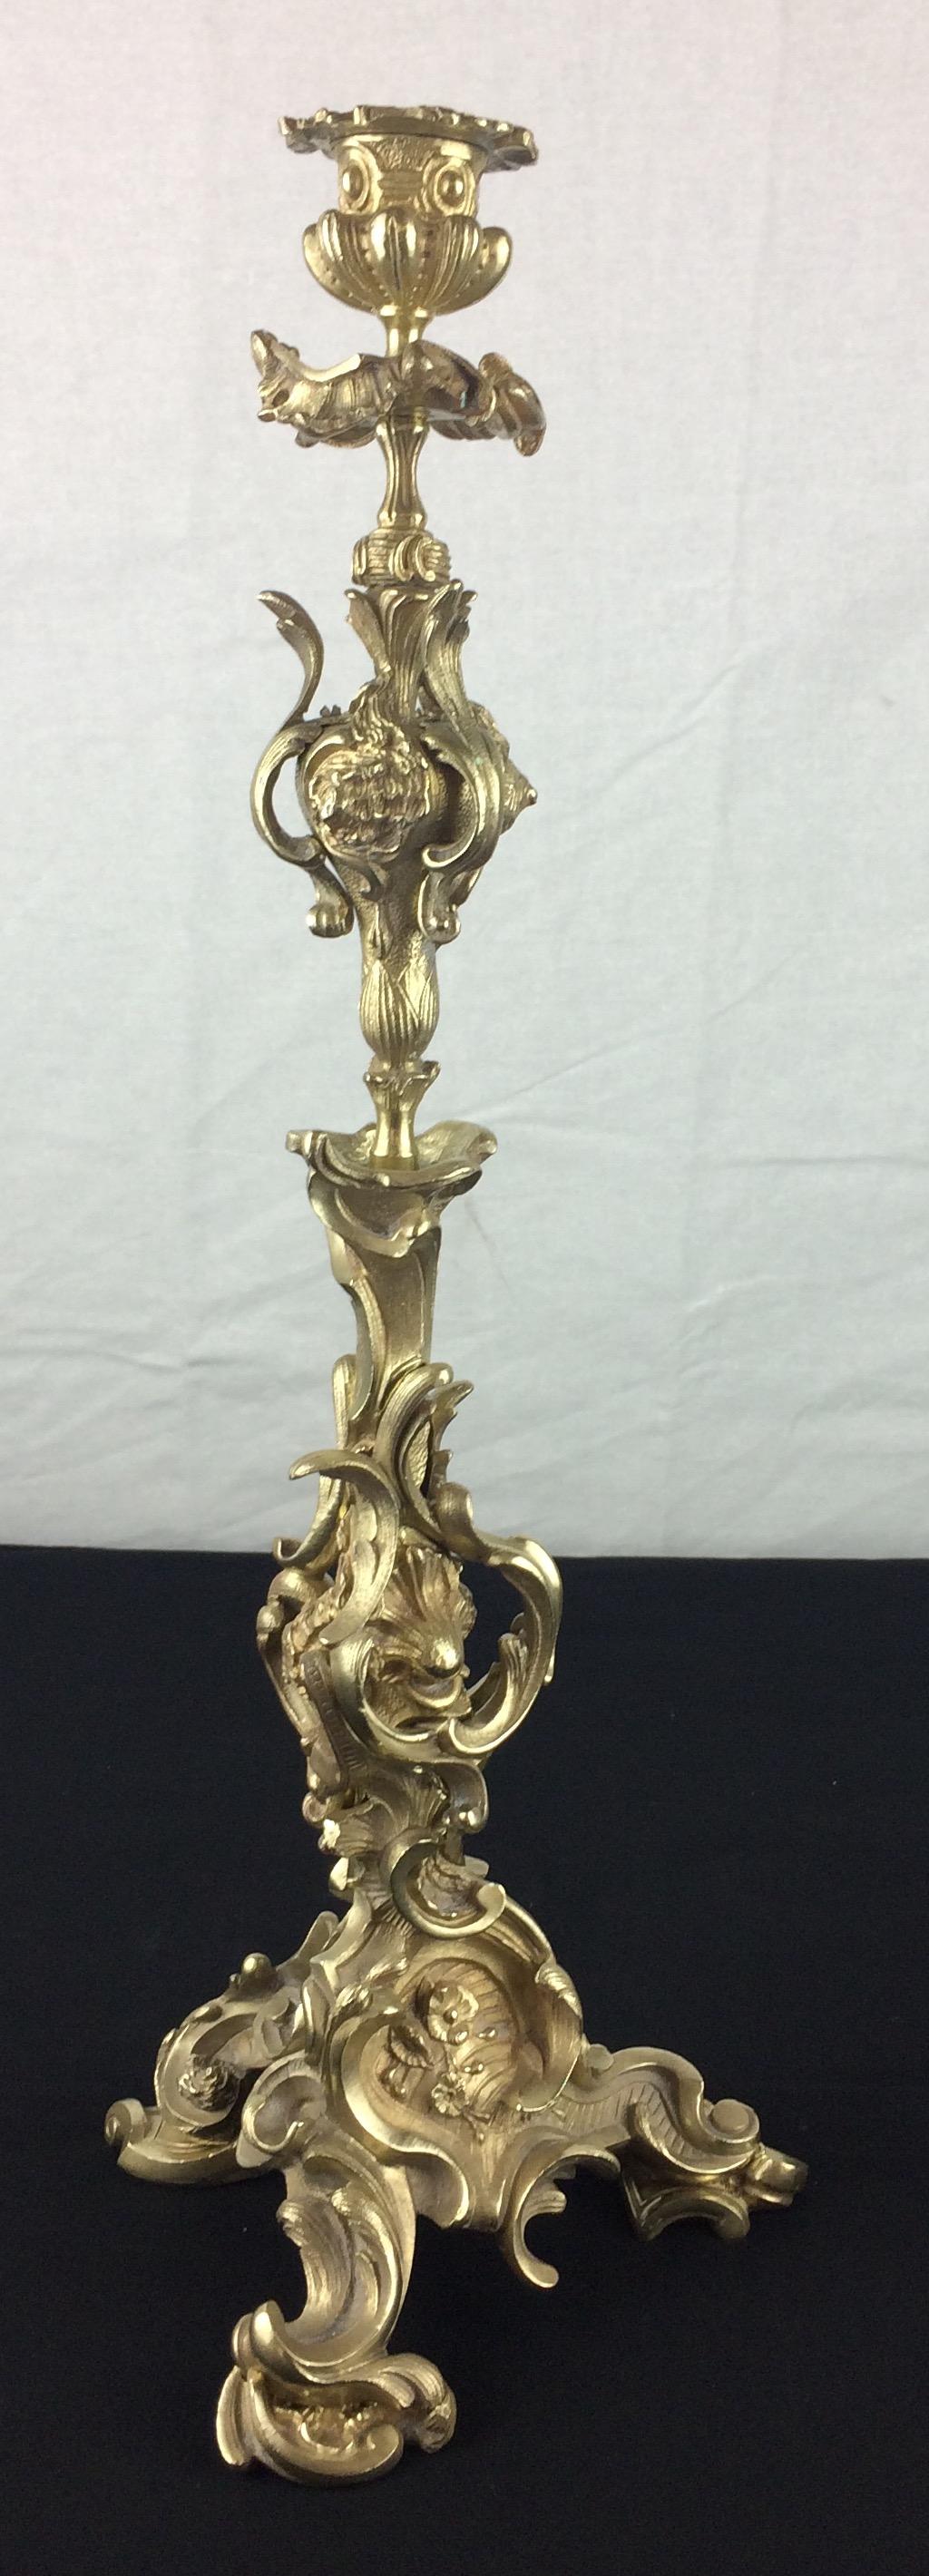 Napoleon III Very Fine Pair of 19th Century French Gilt Bronze Candelabras by Victor Raulin For Sale